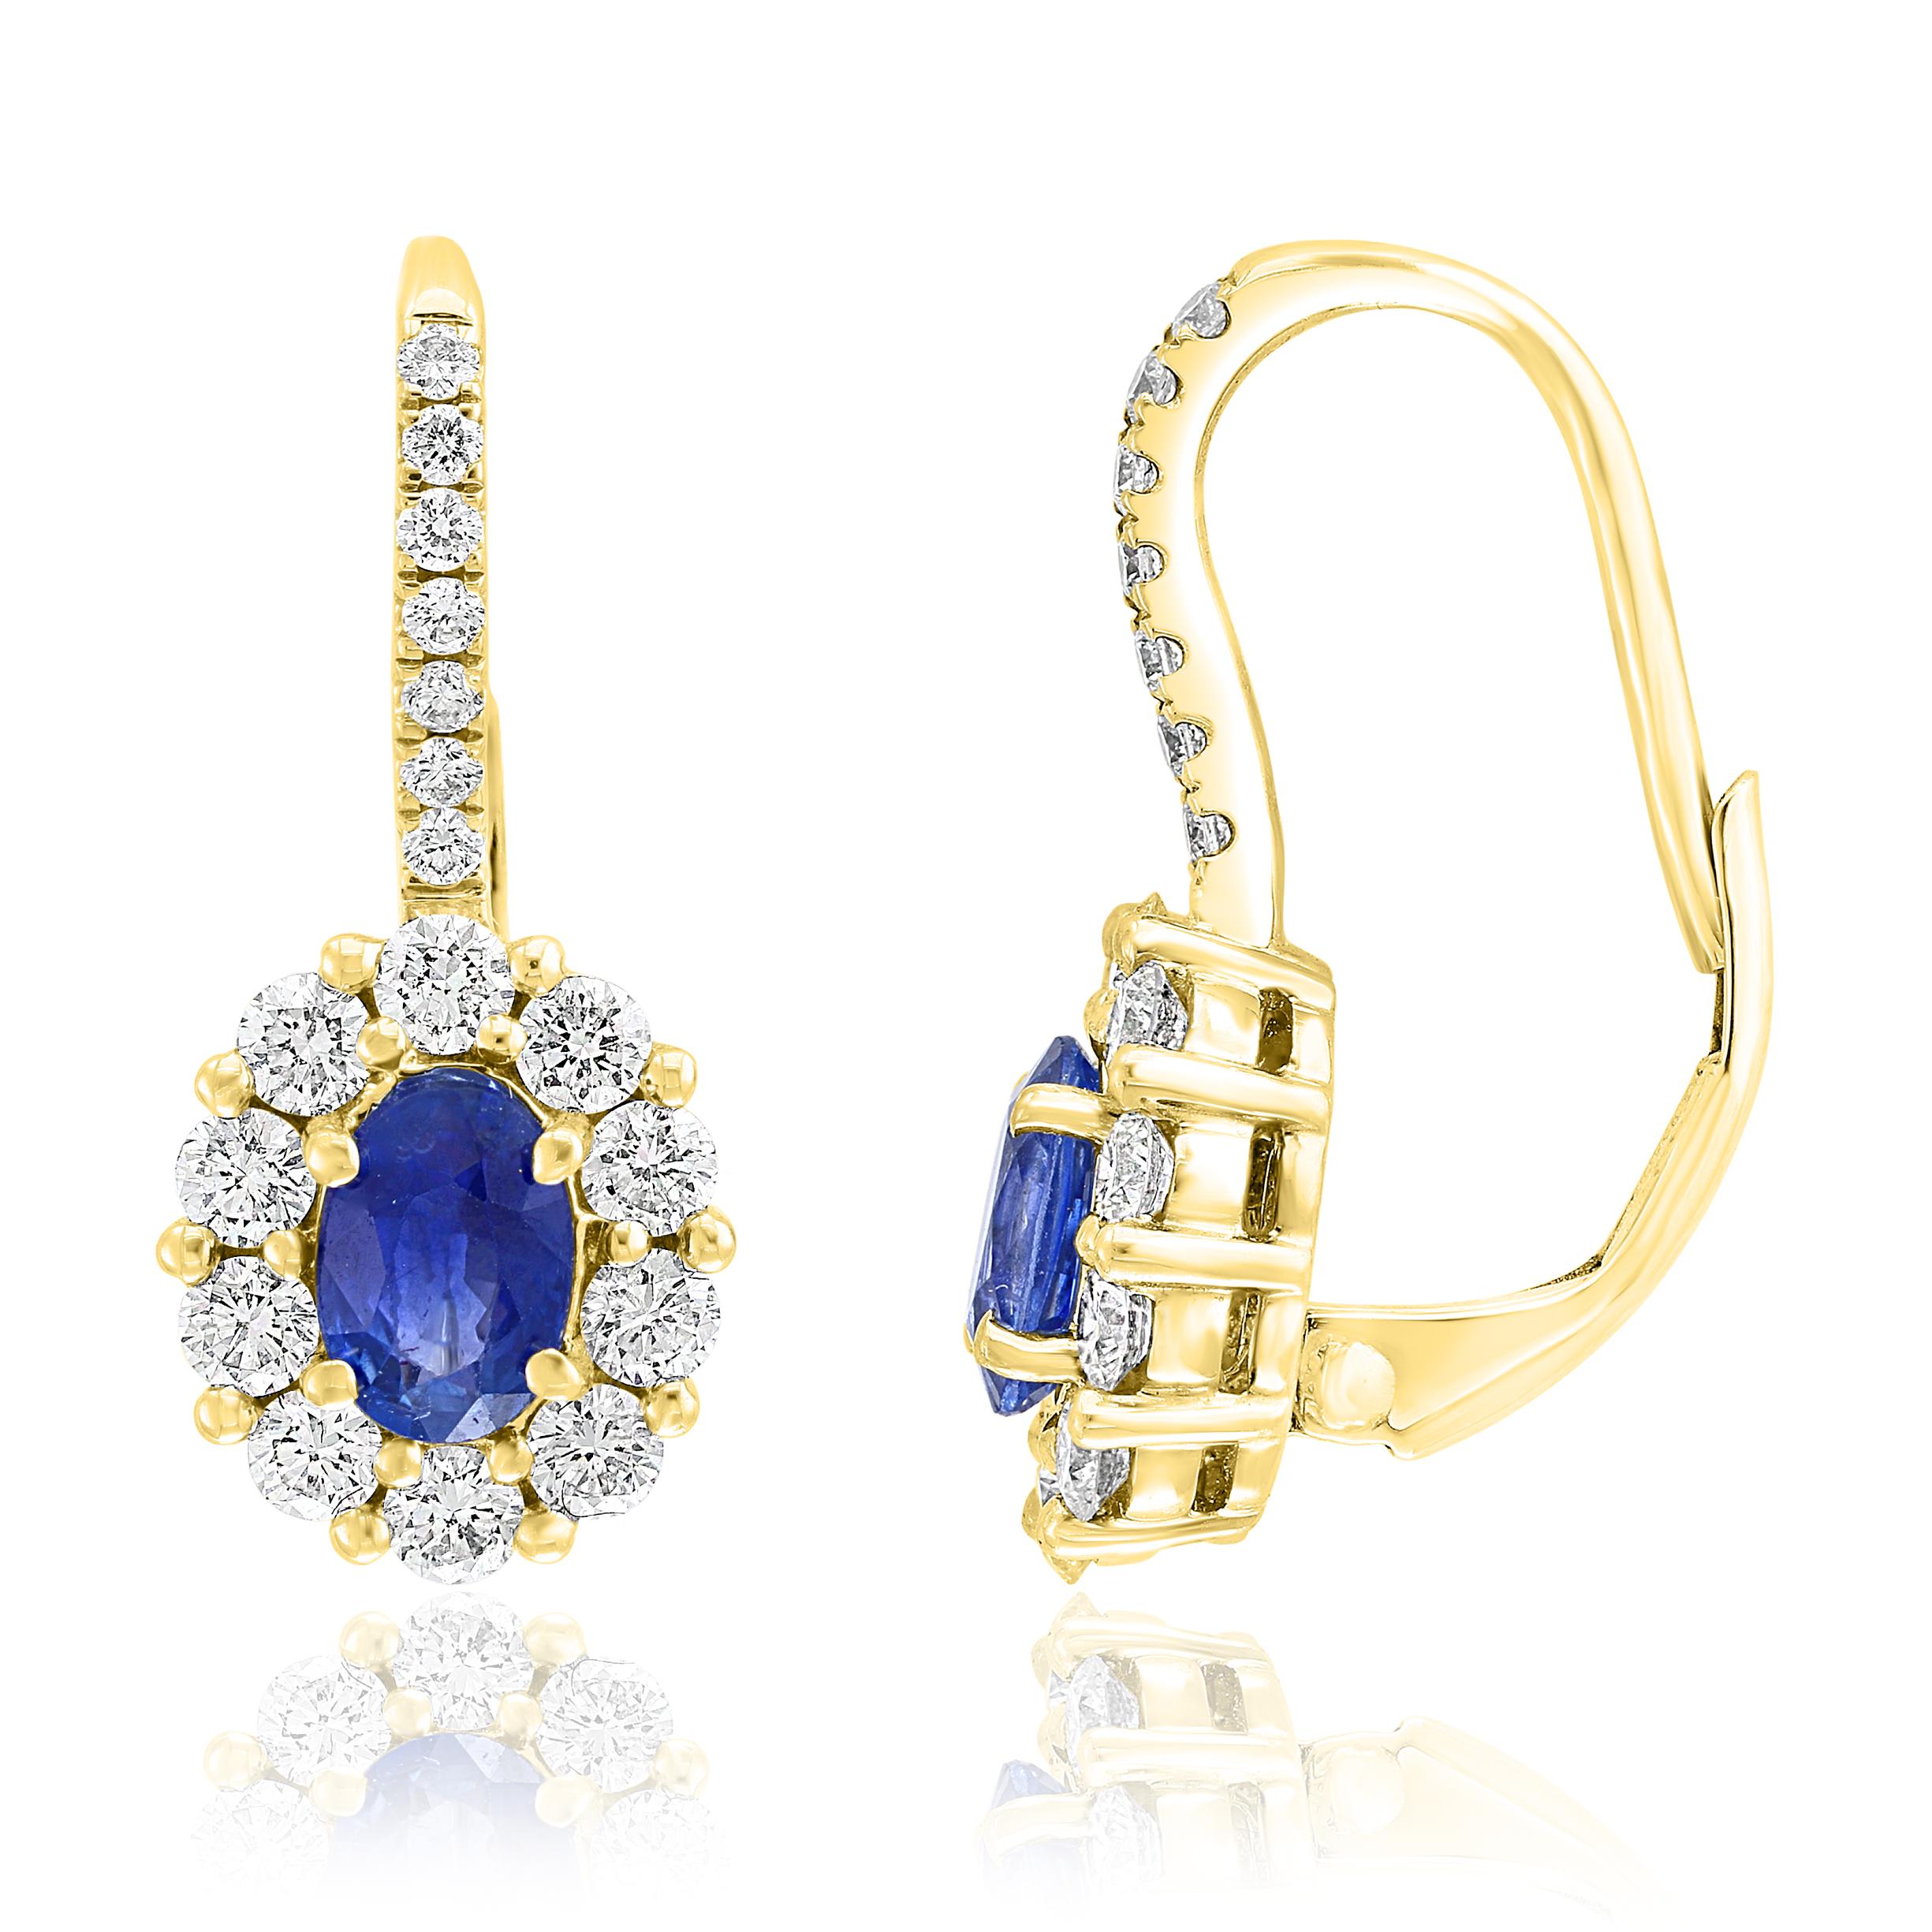 A simple pair of Lever back earrings showcasing 0.88 carats of oval cut blue sapphires, surrounded by a single row of 34 round brilliant diamonds weighing 0.92 carats. Made in 18-karat Yellow gold.